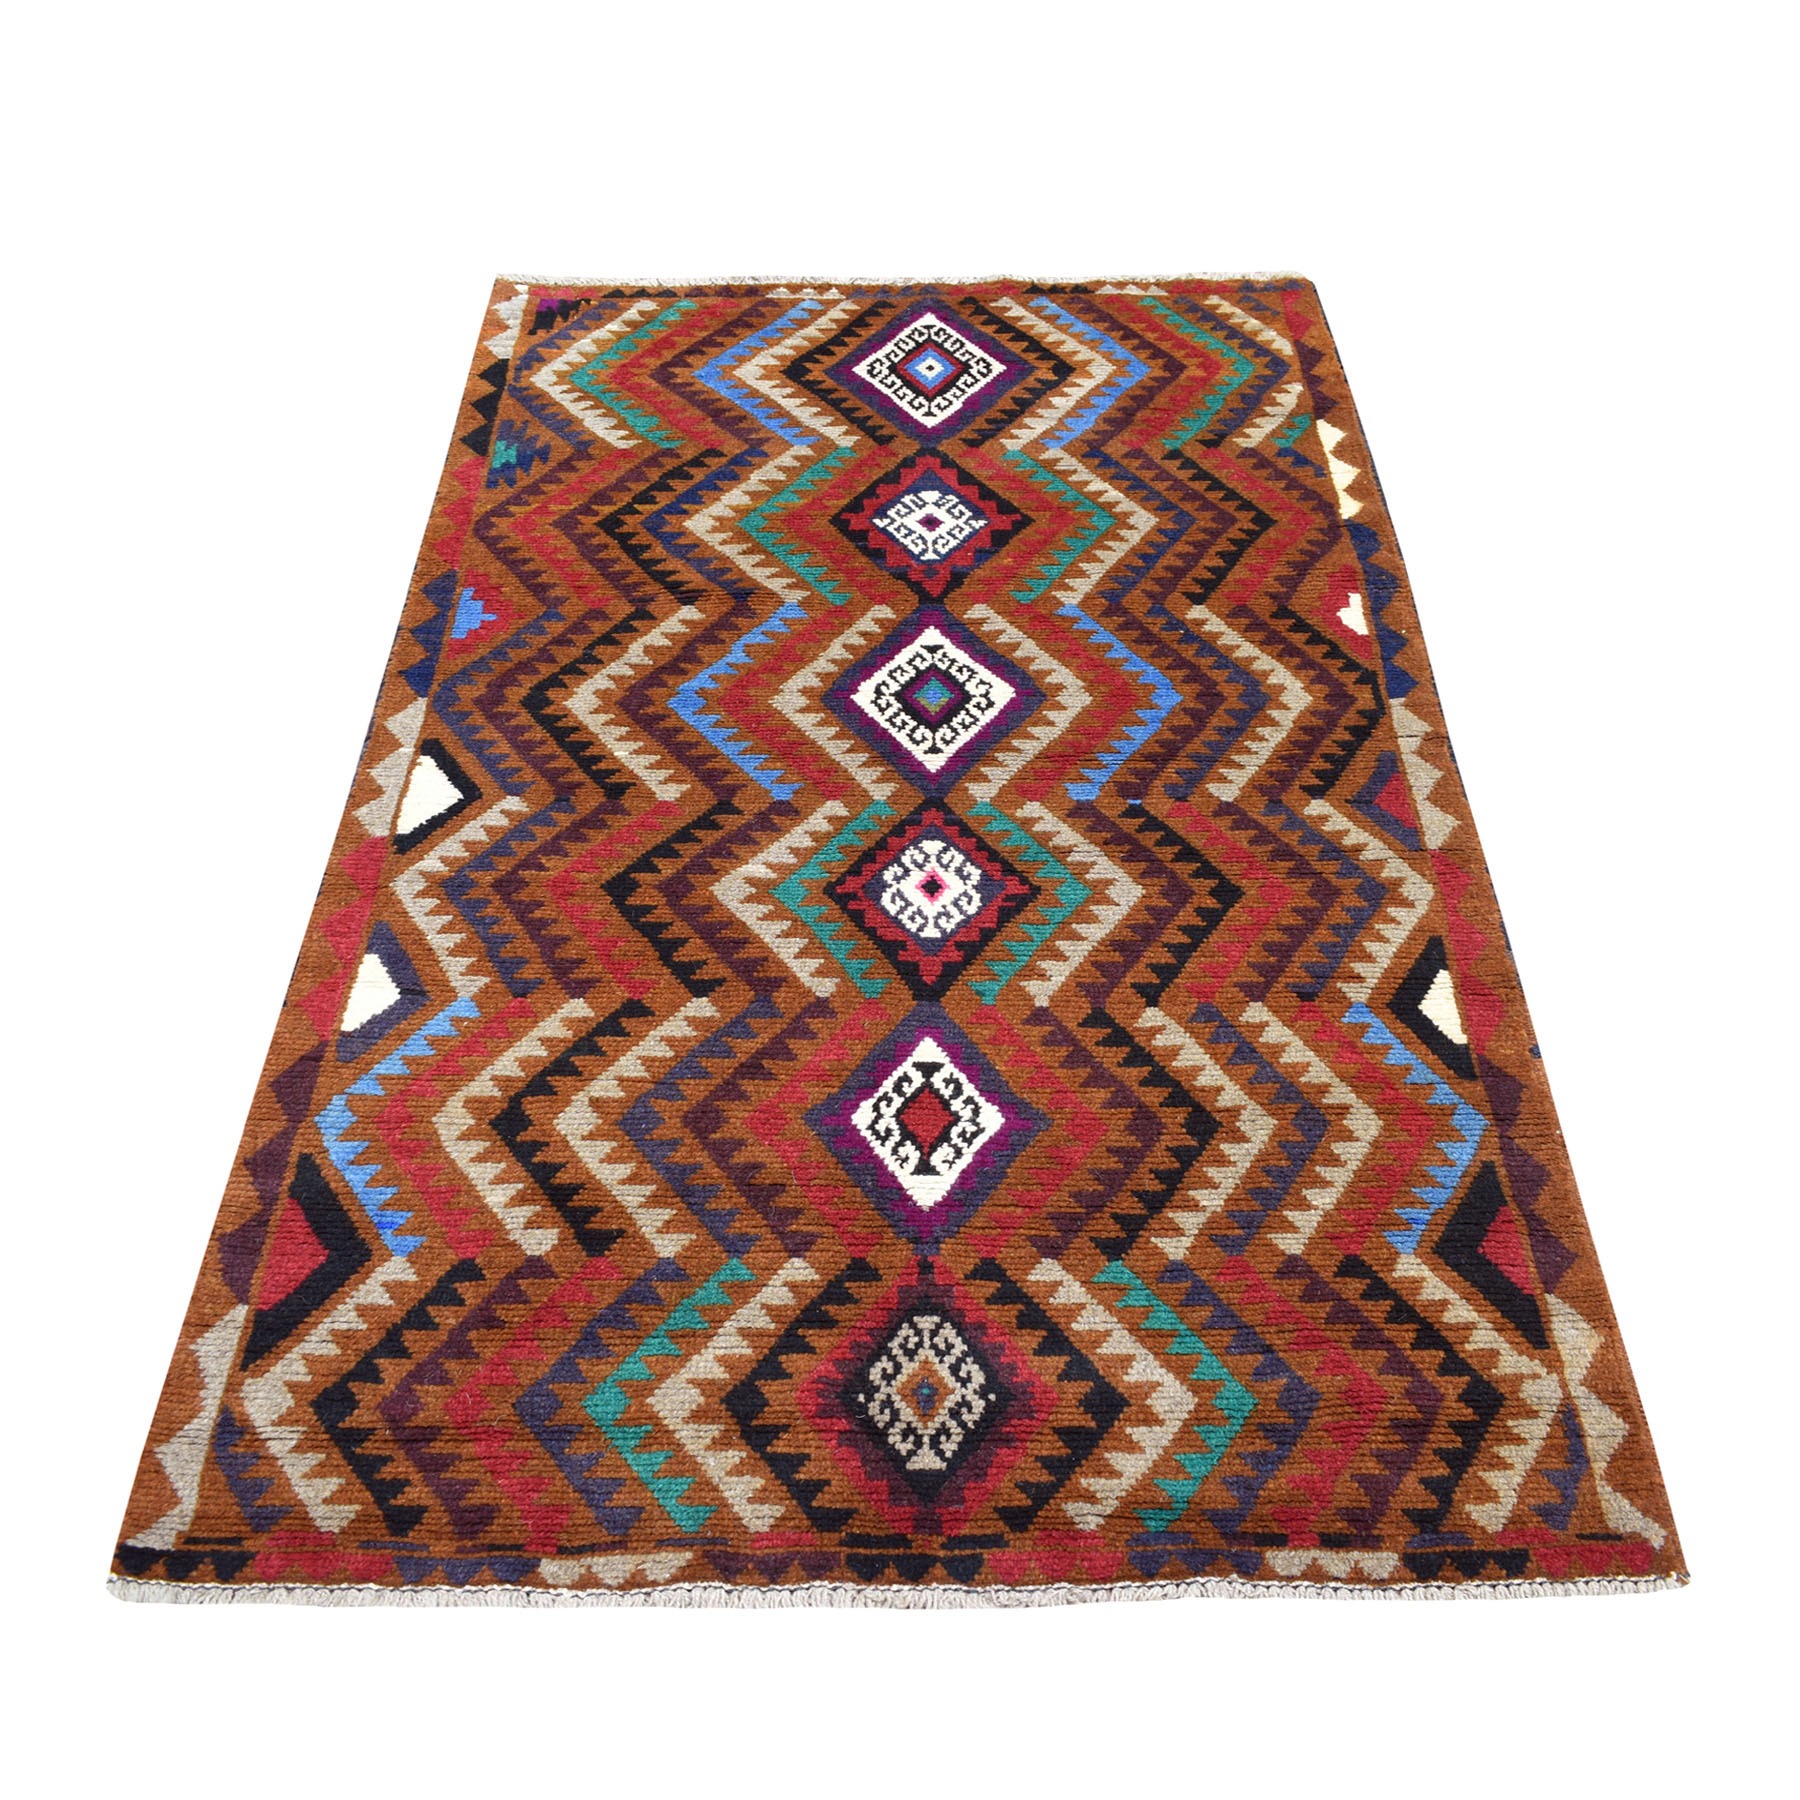 3'7"x6'1" Brown Natural Dyes Geometric Design Colorful Afghan Baluch Hand Woven 100% Wool Oriental Rug 